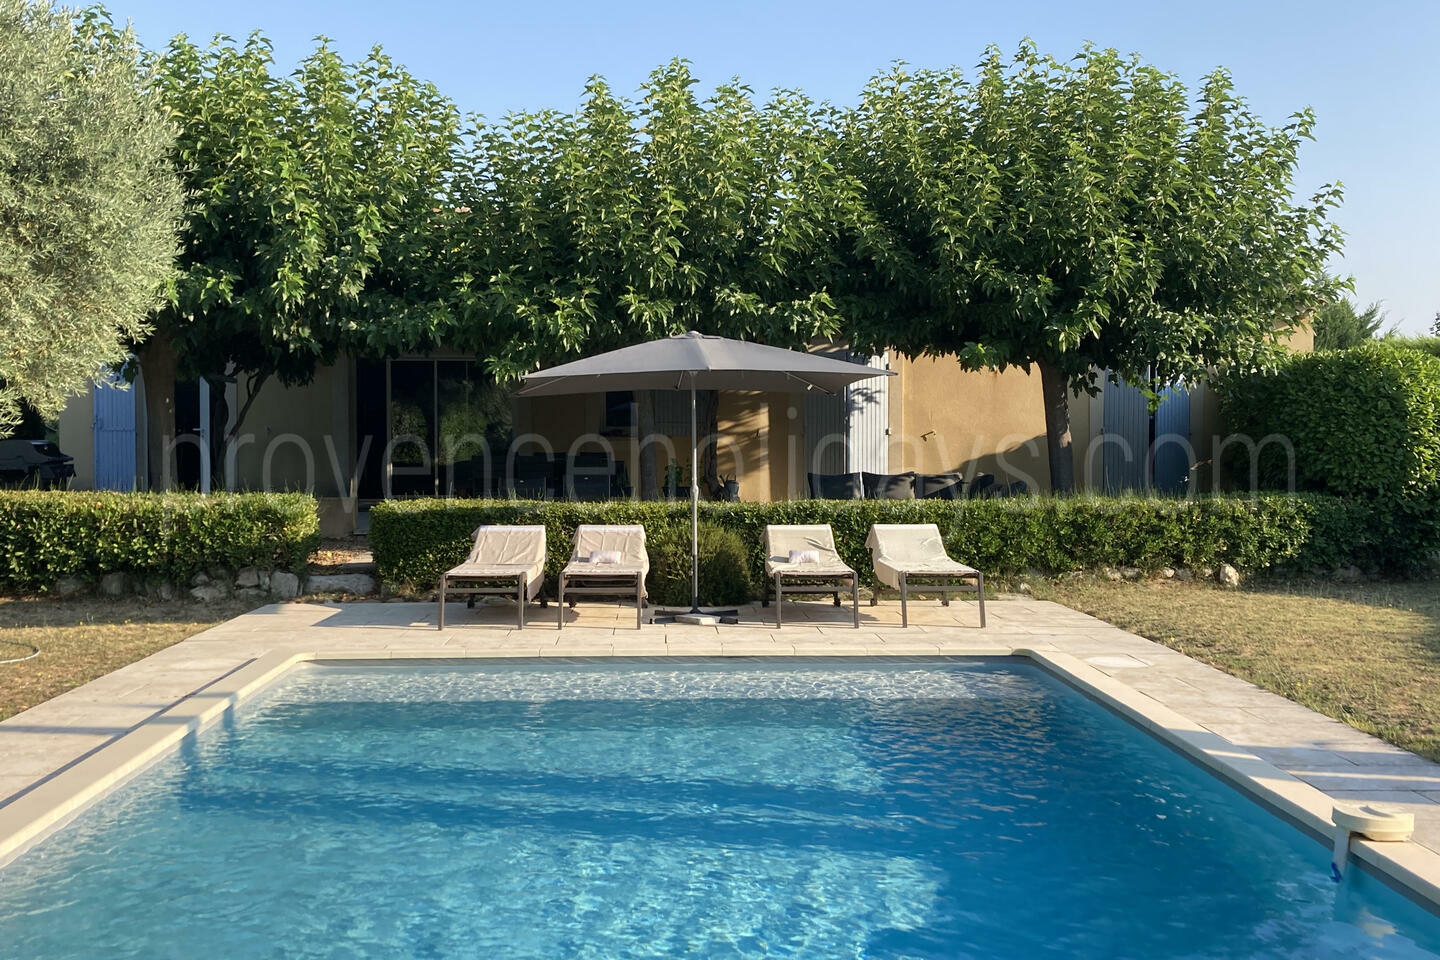 Charming Holiday Rental with Air Conditioning in Oppède 1 - Villa Bécune: Villa: Pool